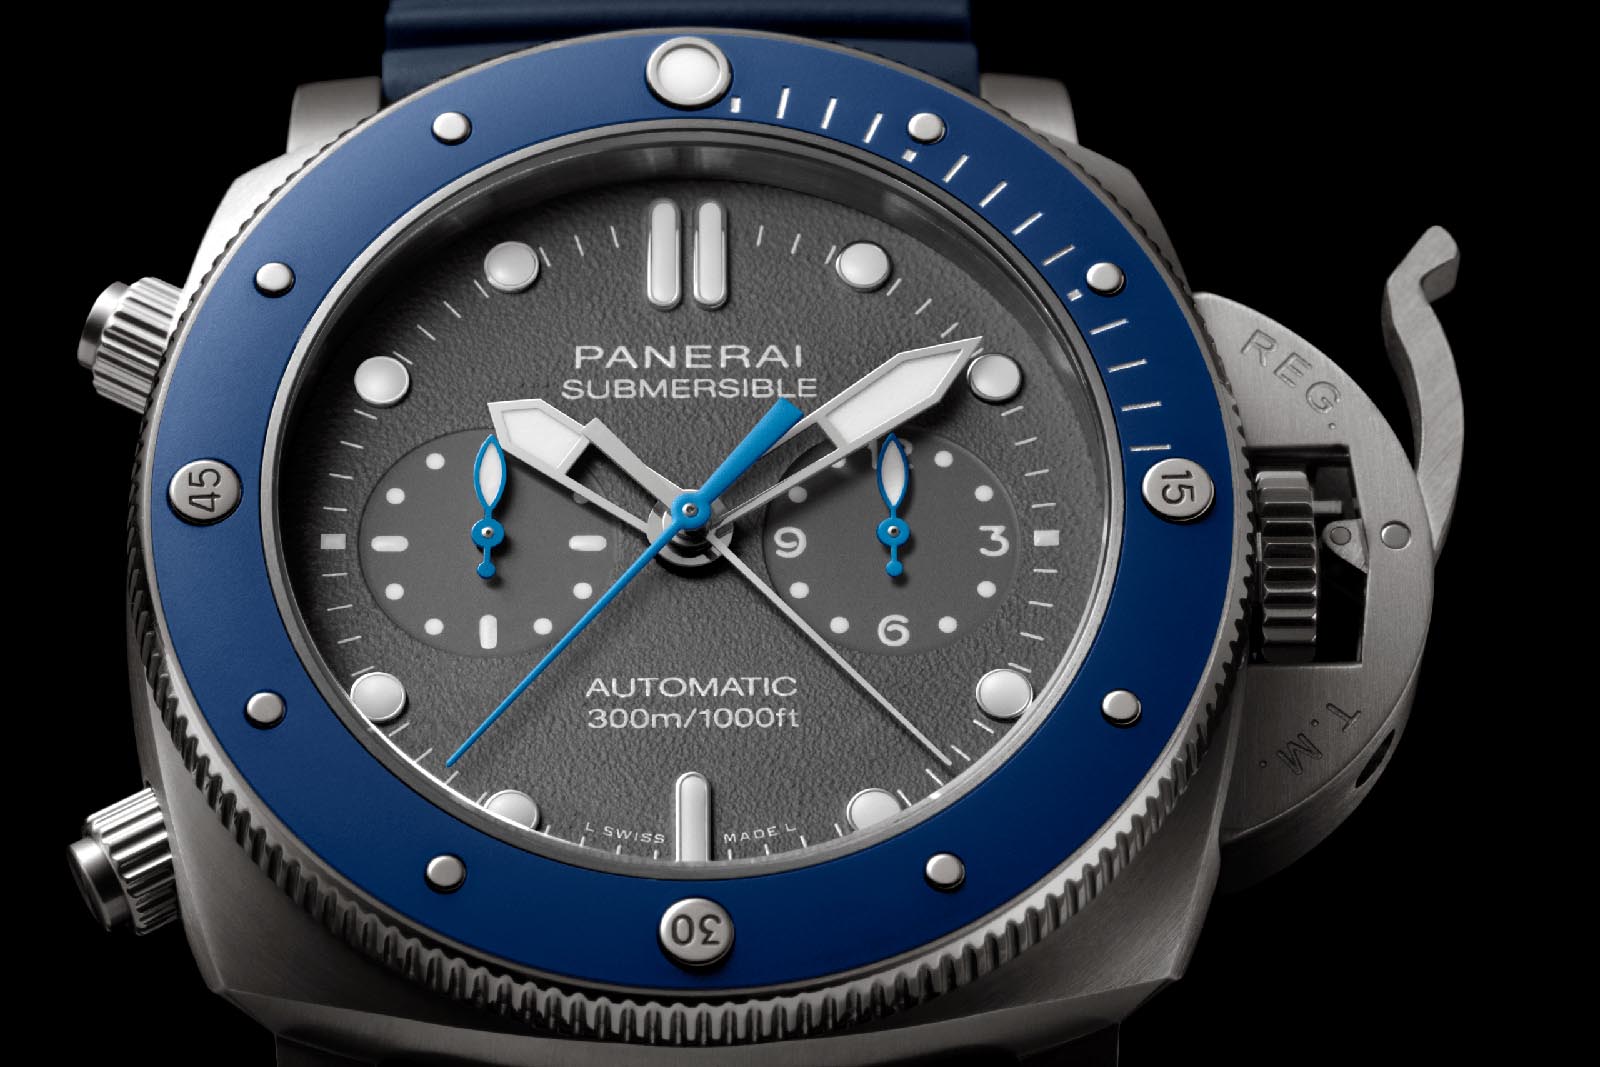 Panerai Submersible Chrono Guillaume Néry Edition PAM00982 3